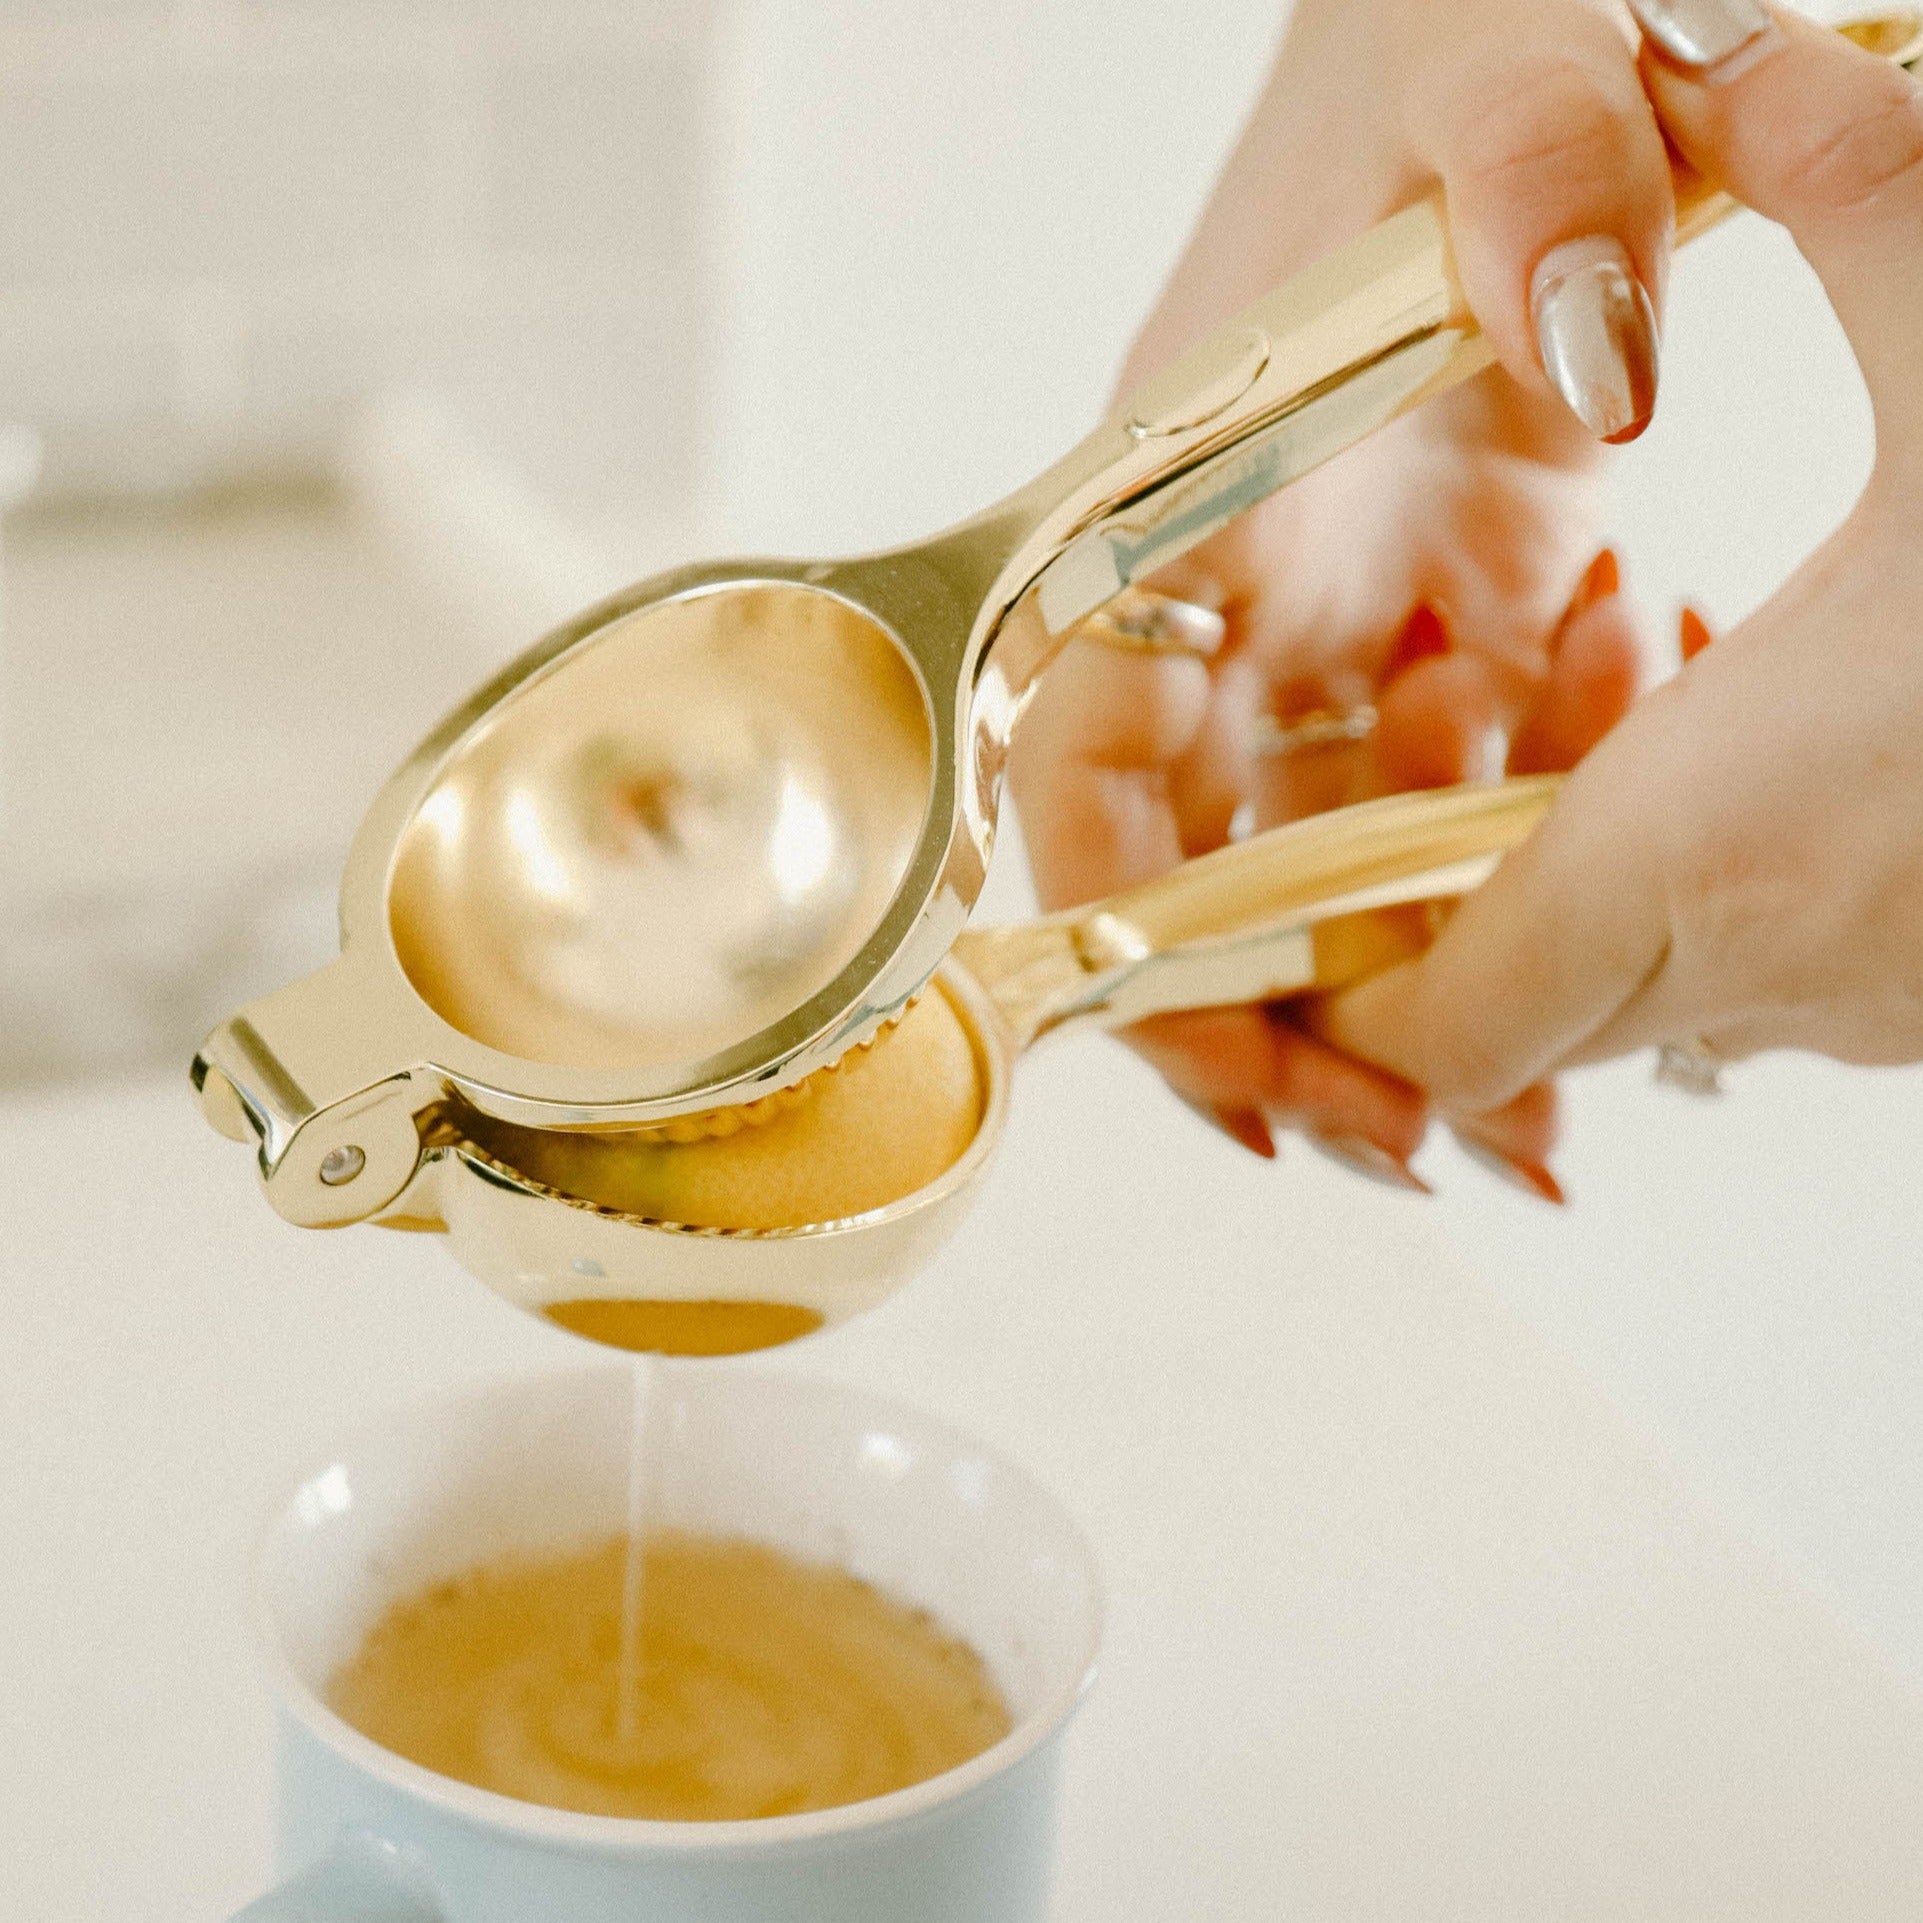 A woman's hands using a gold metal citrus press to squeeze half a lemon into a blue mug holding tea. The background is white and blurred out.